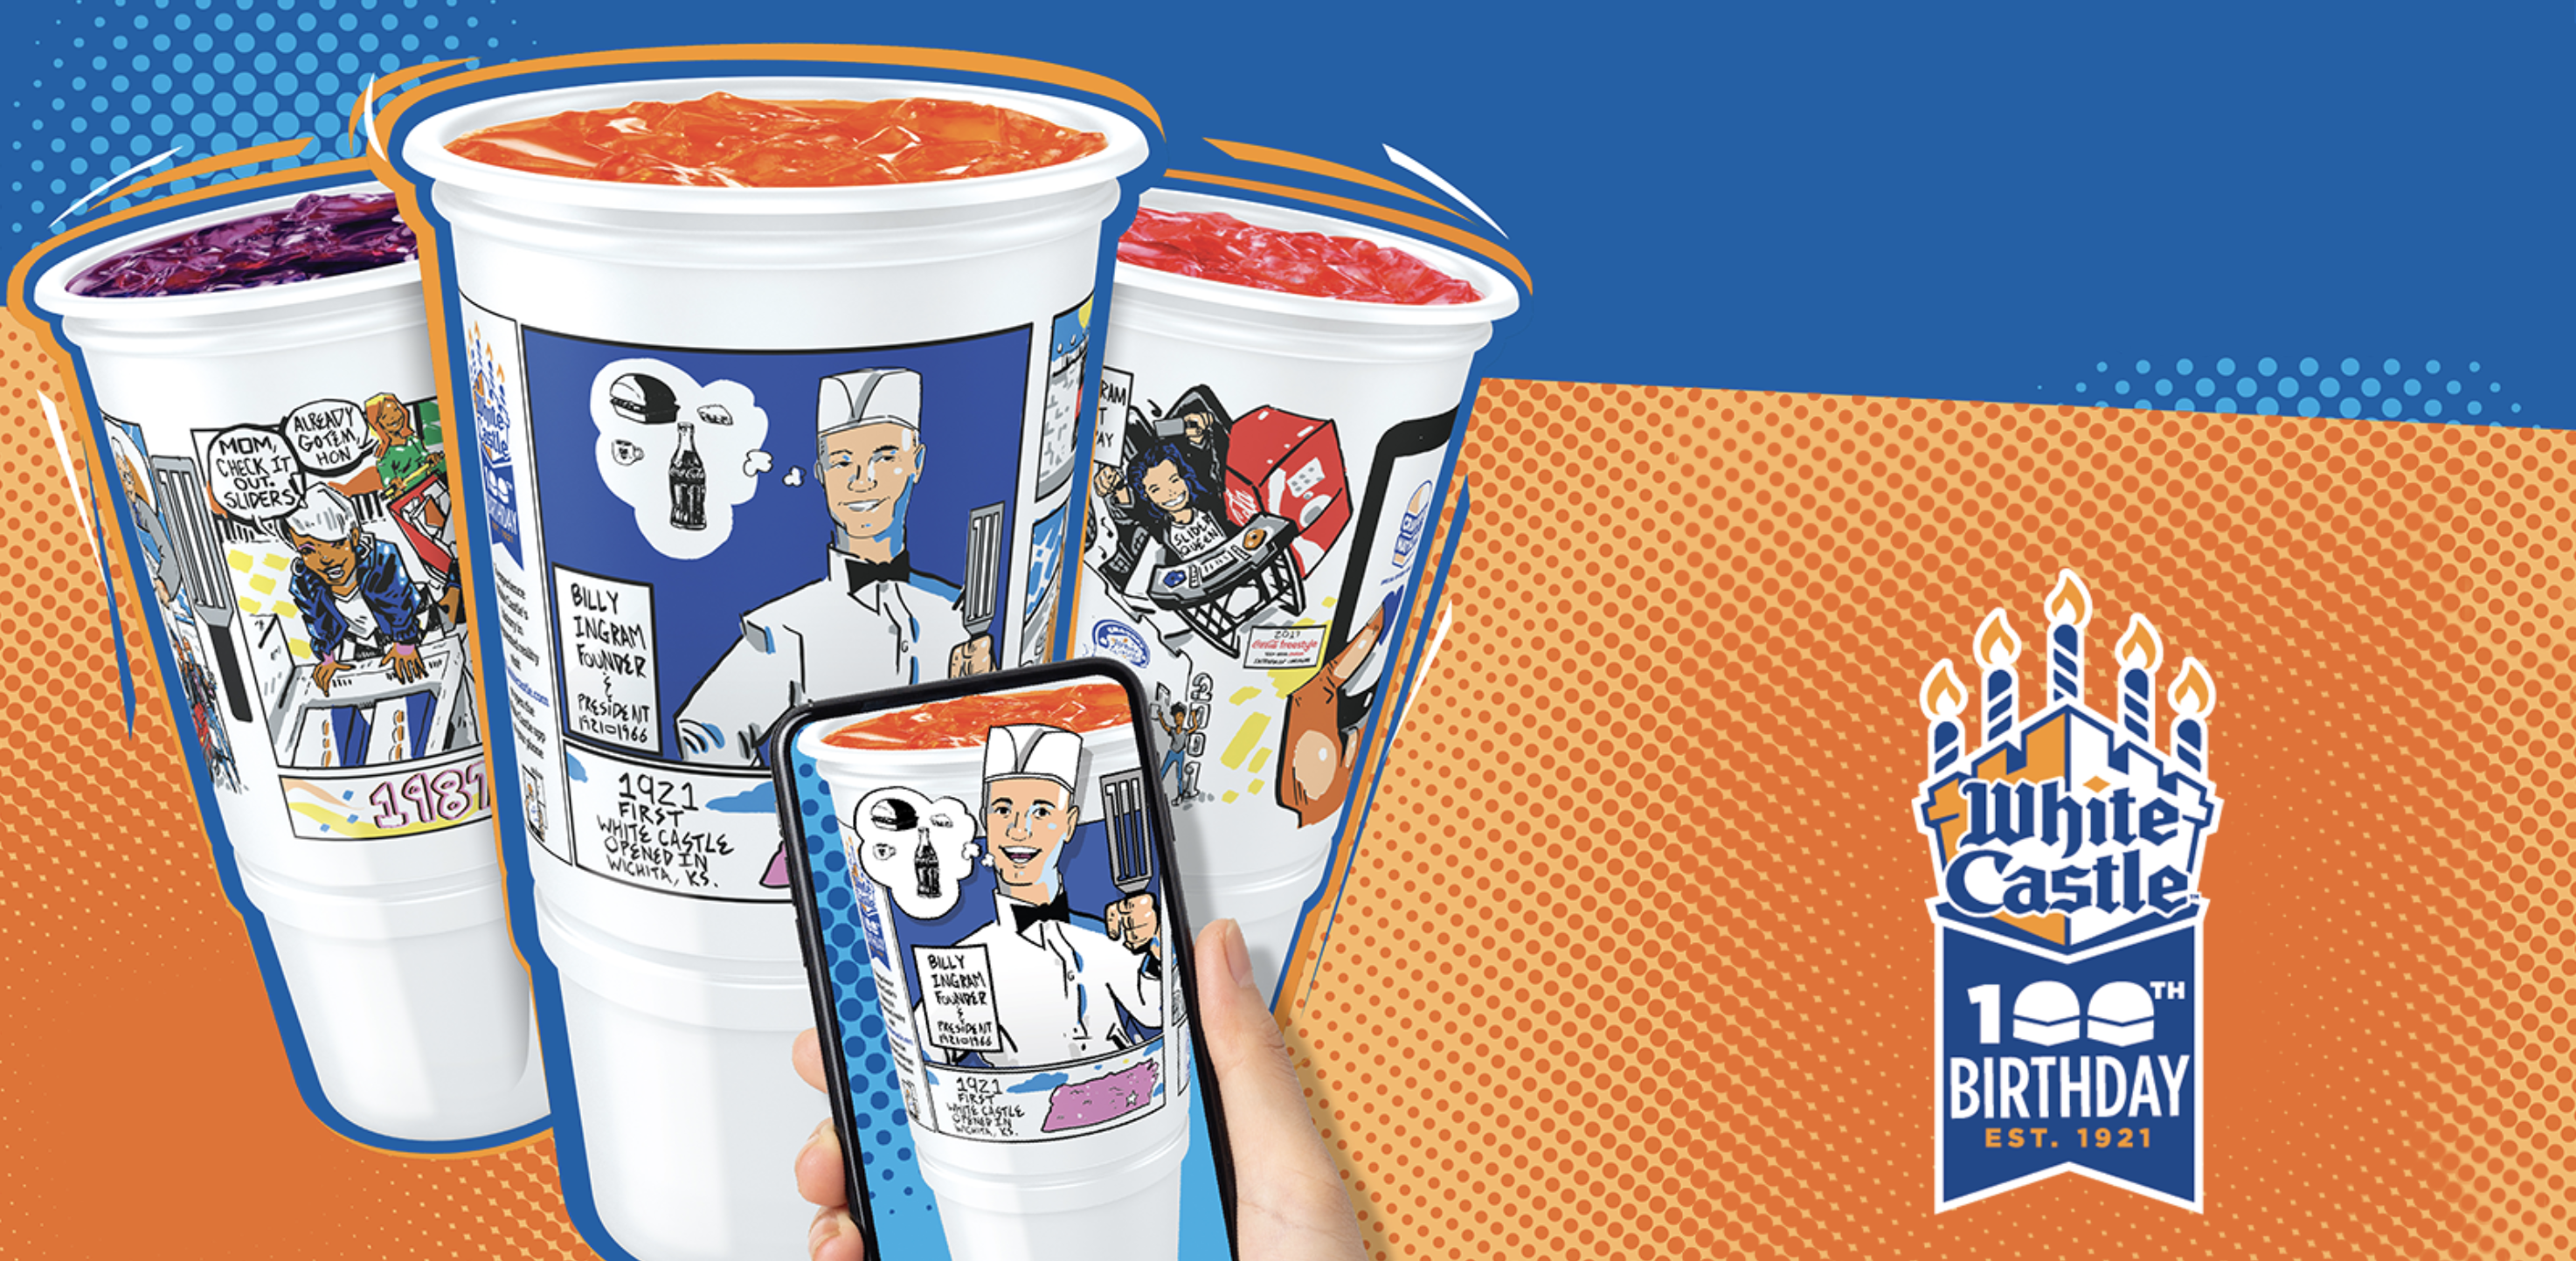 White Castle collaborated with Coca-Cola to introduce collectible augmented reality cups to celebrate its 100th birthday